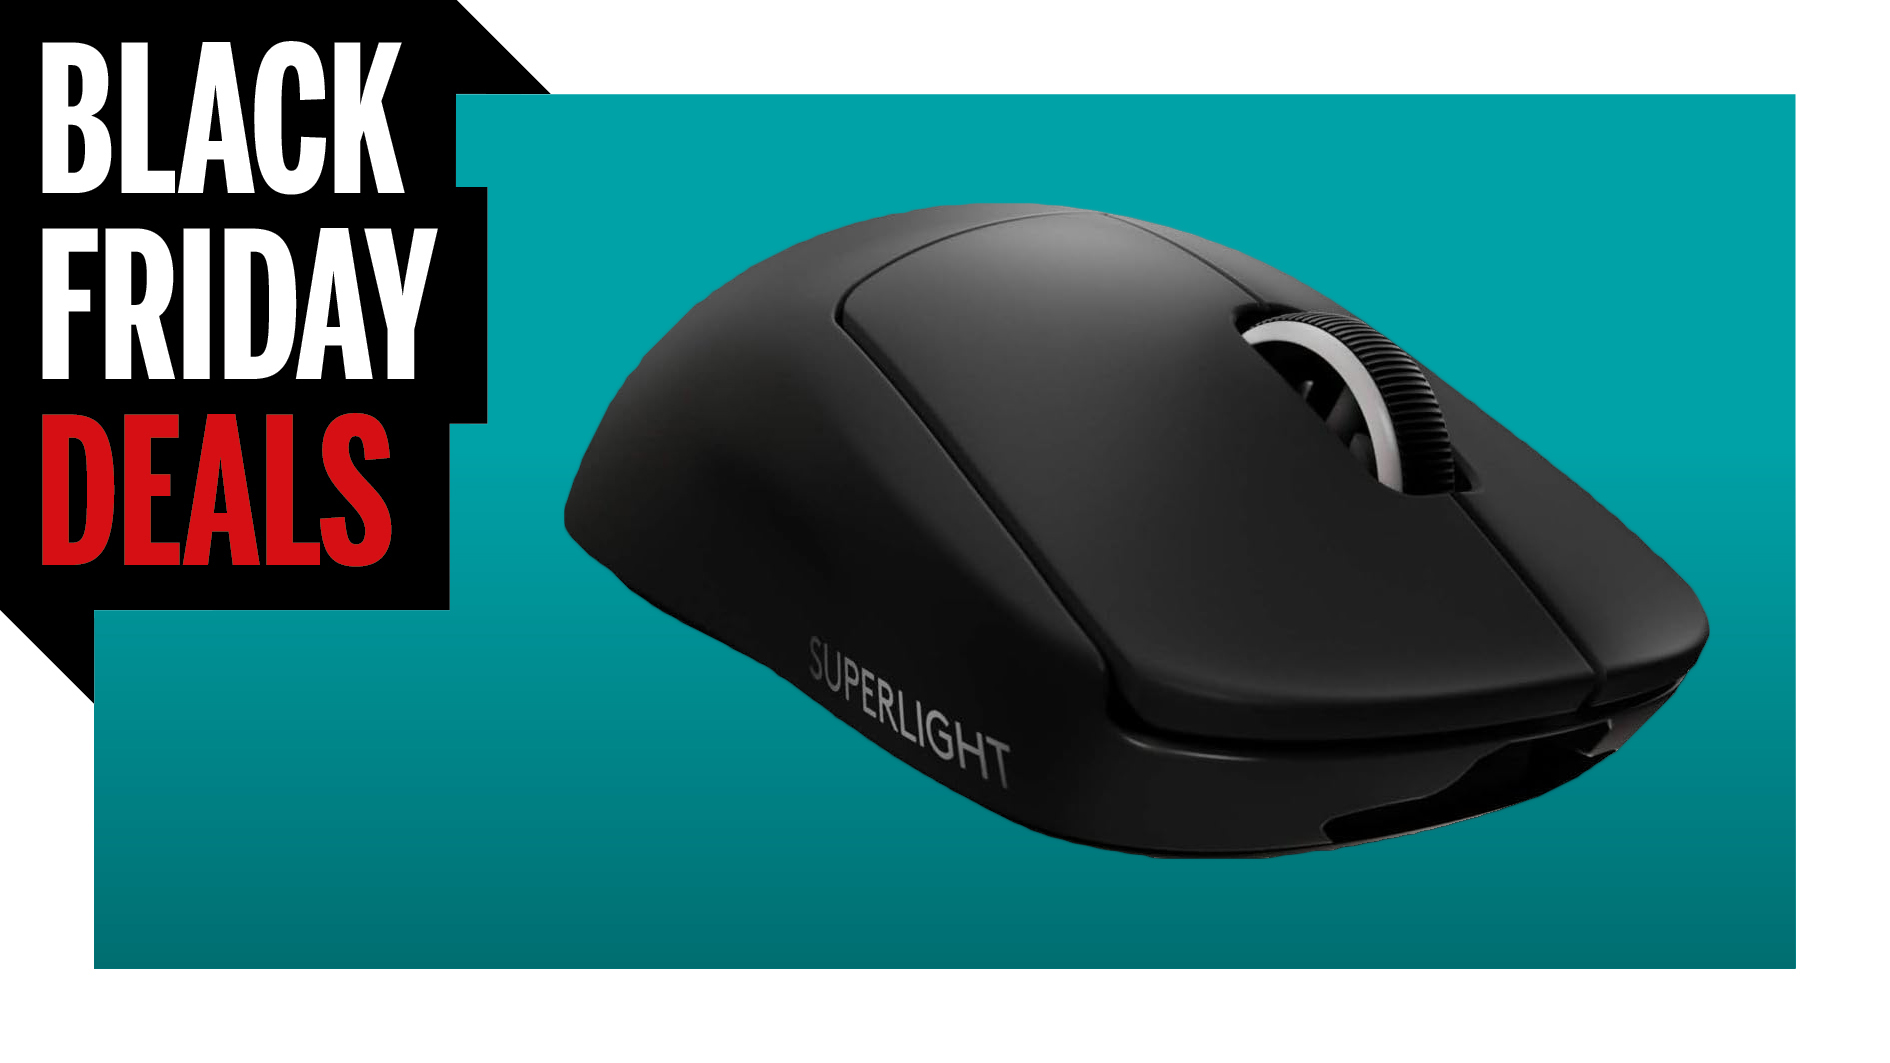 Logitech's G Pro wireless gaming mouse gets a price cut again, now